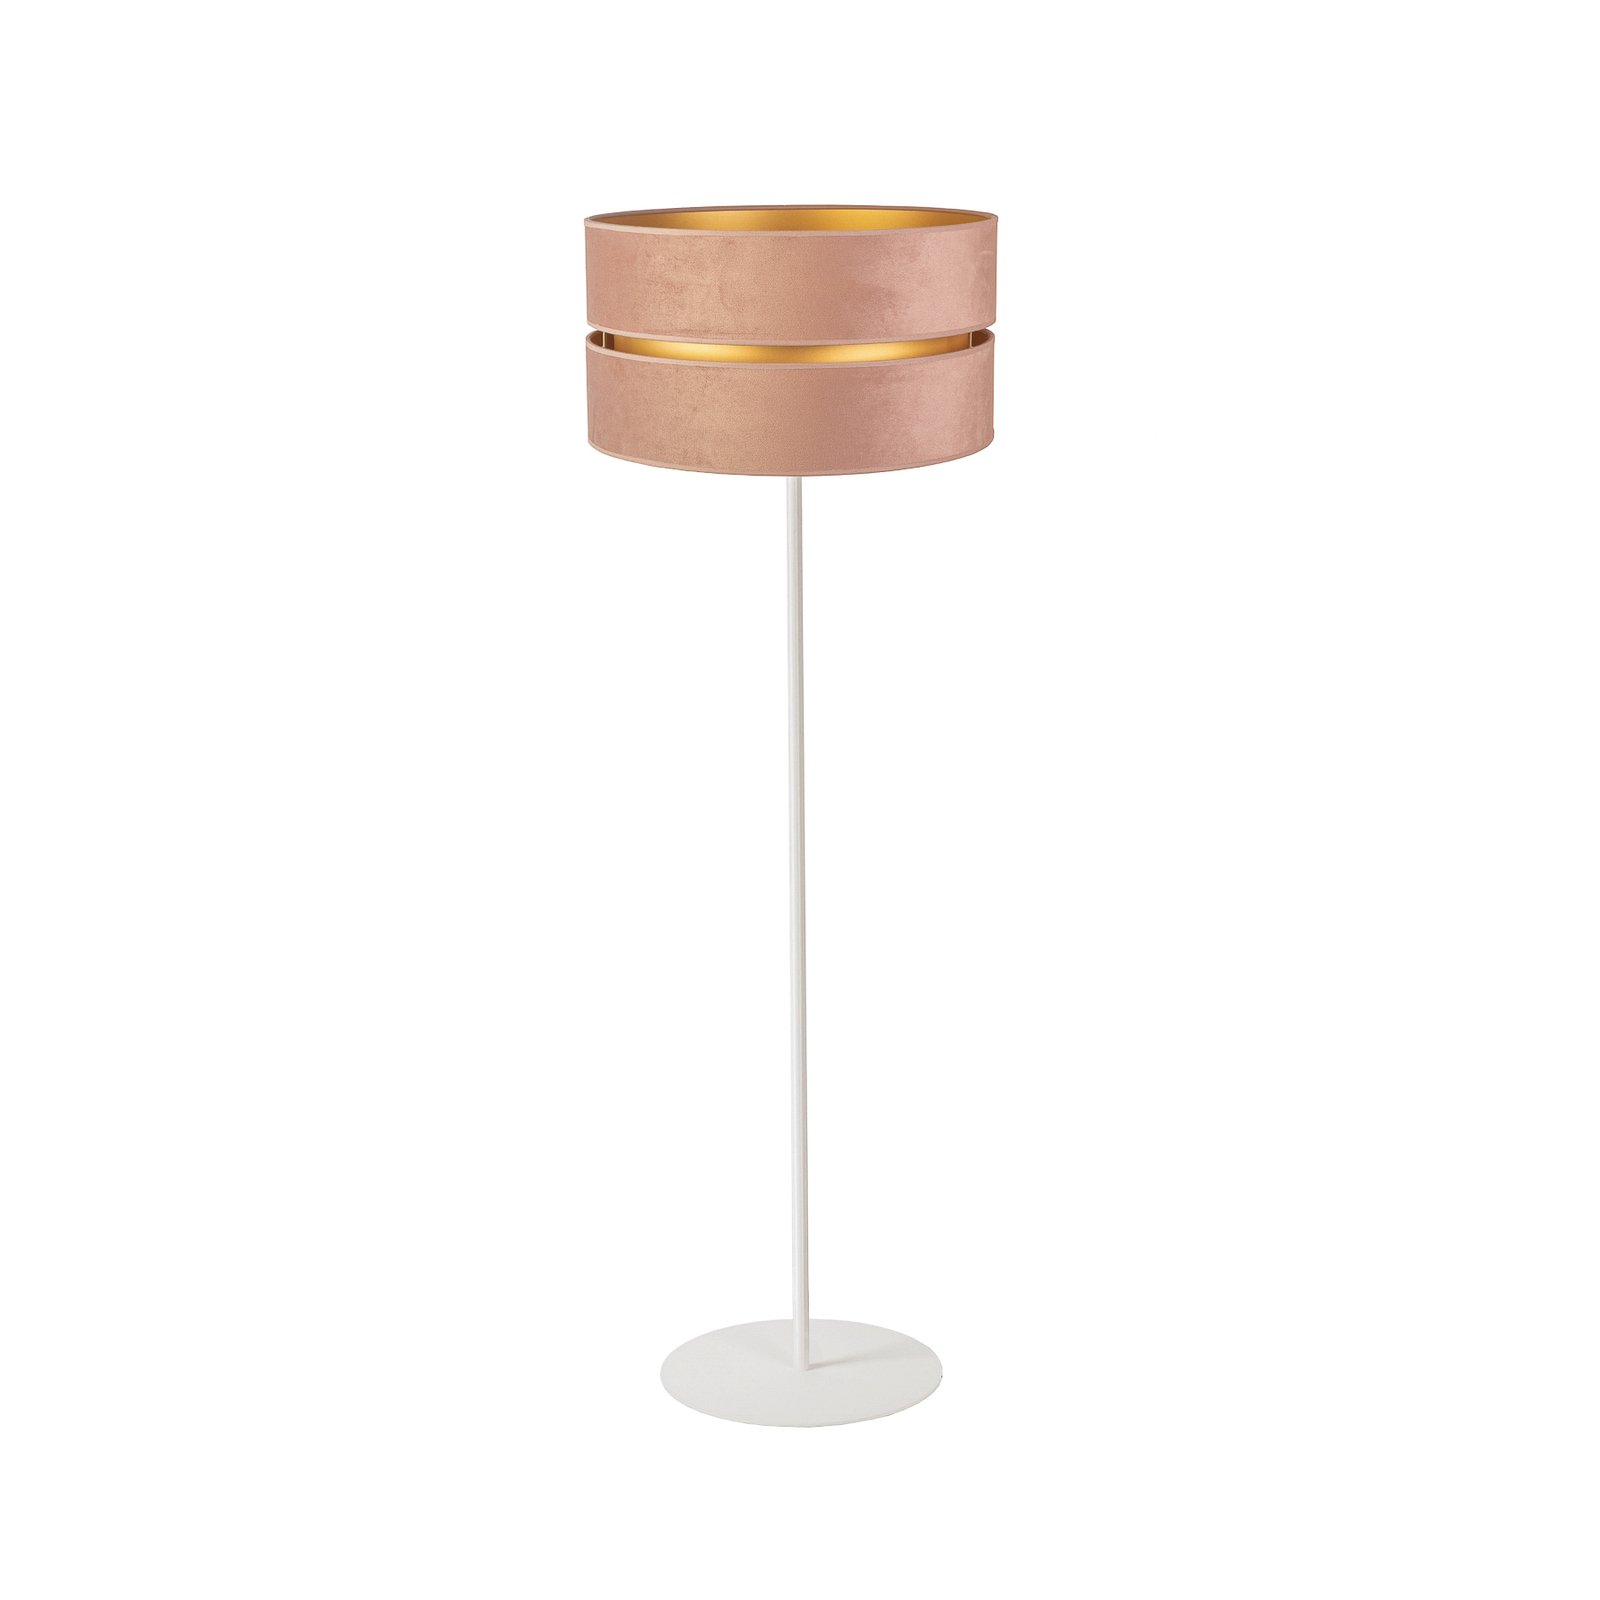 Stehlampe Golden Duo hellrosa/gold